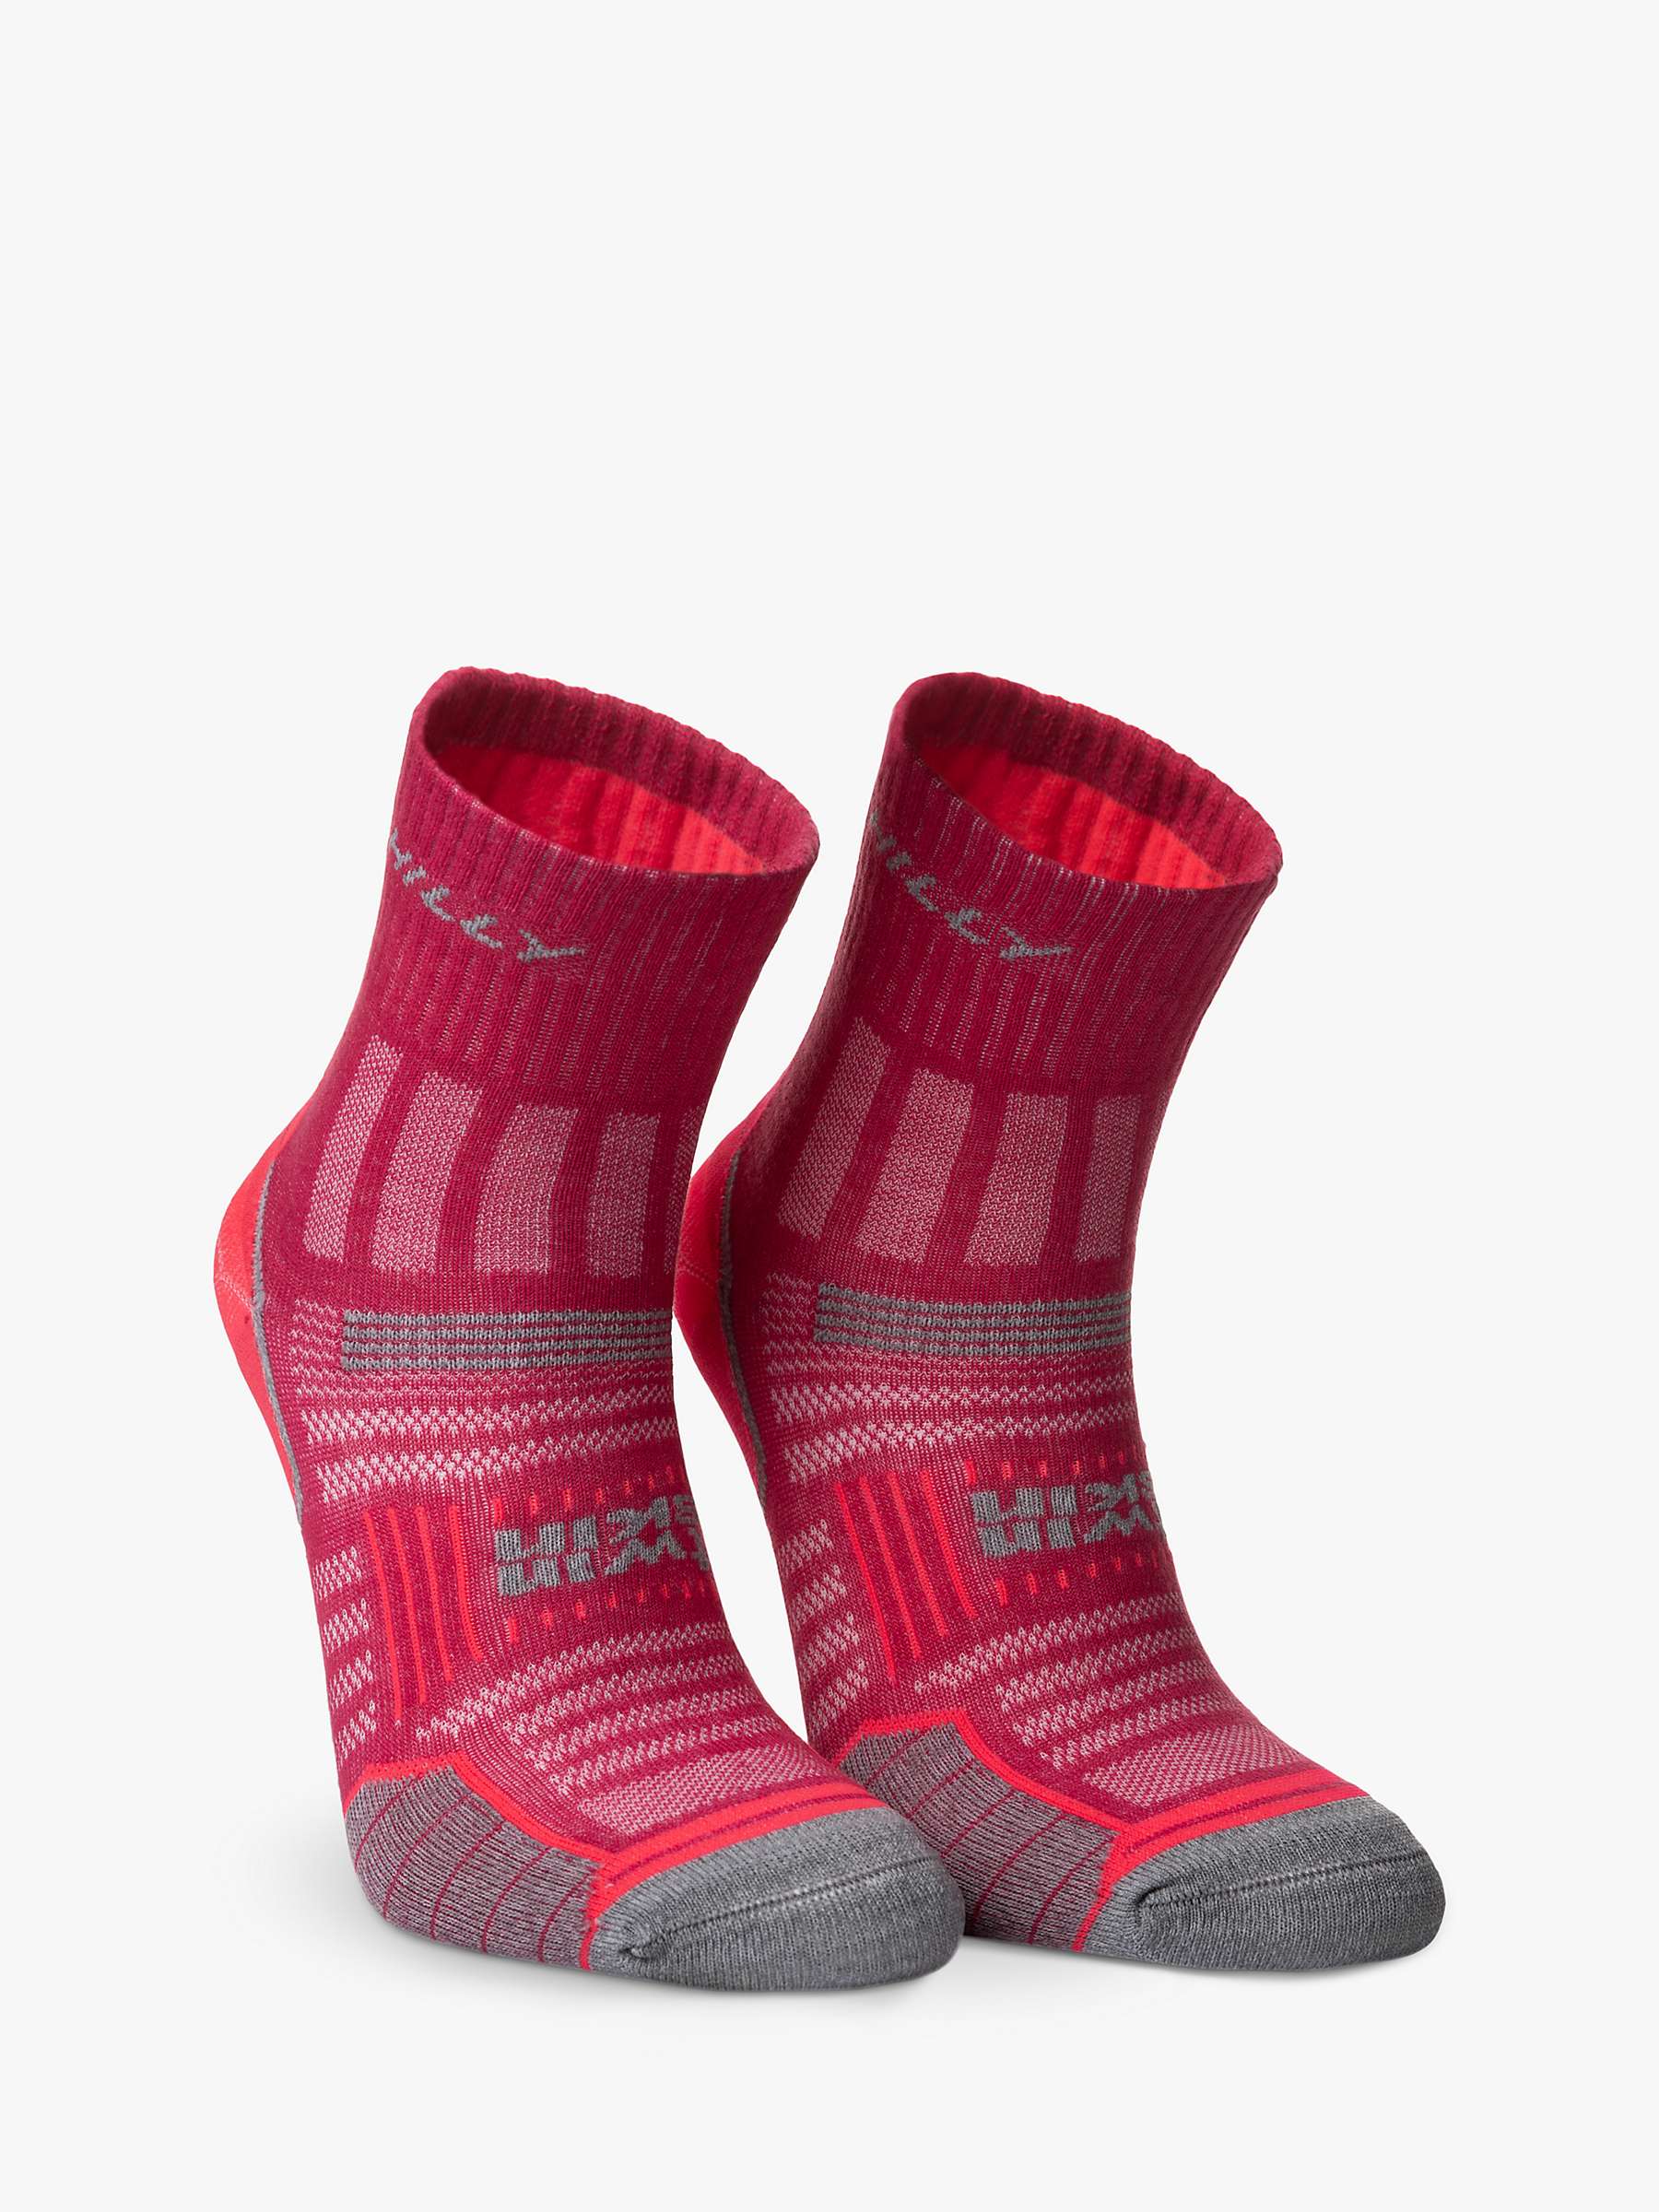 Buy Hilly Twin Skin Ankle Running Socks Online at johnlewis.com